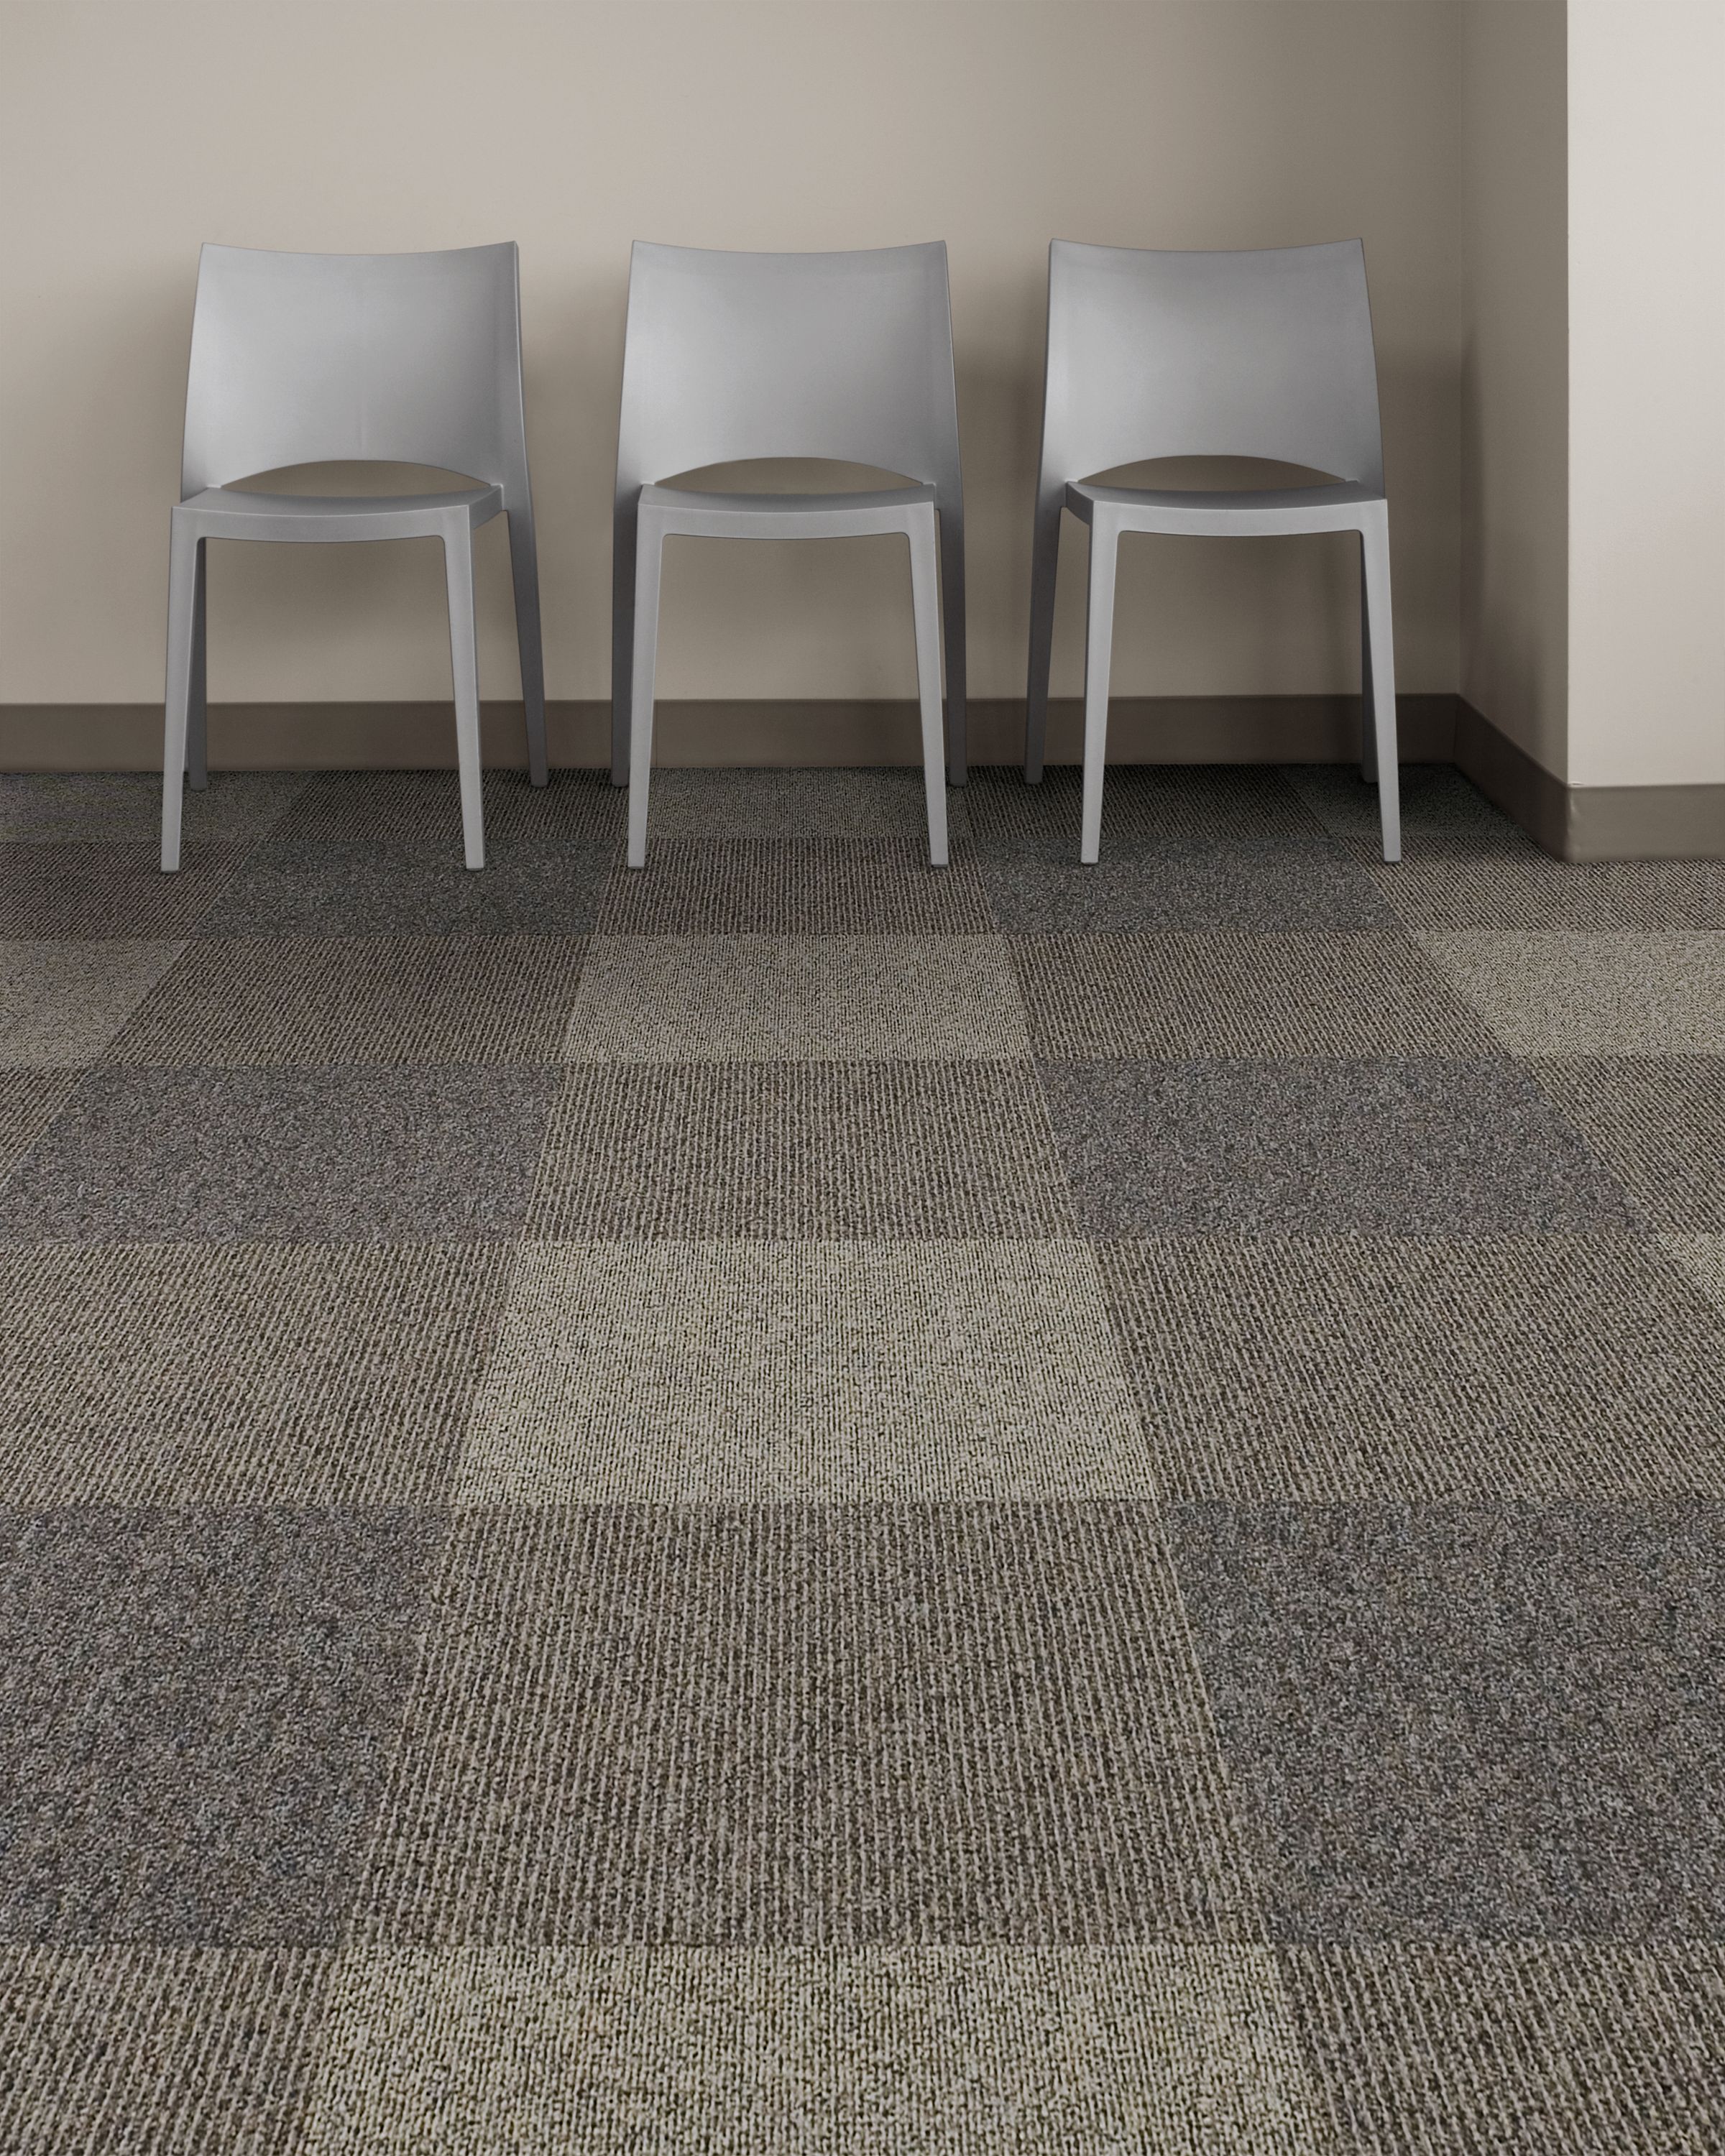 Interface Broomed, Grooved and Brushed carpet tile in room with three chairs numéro d’image 2